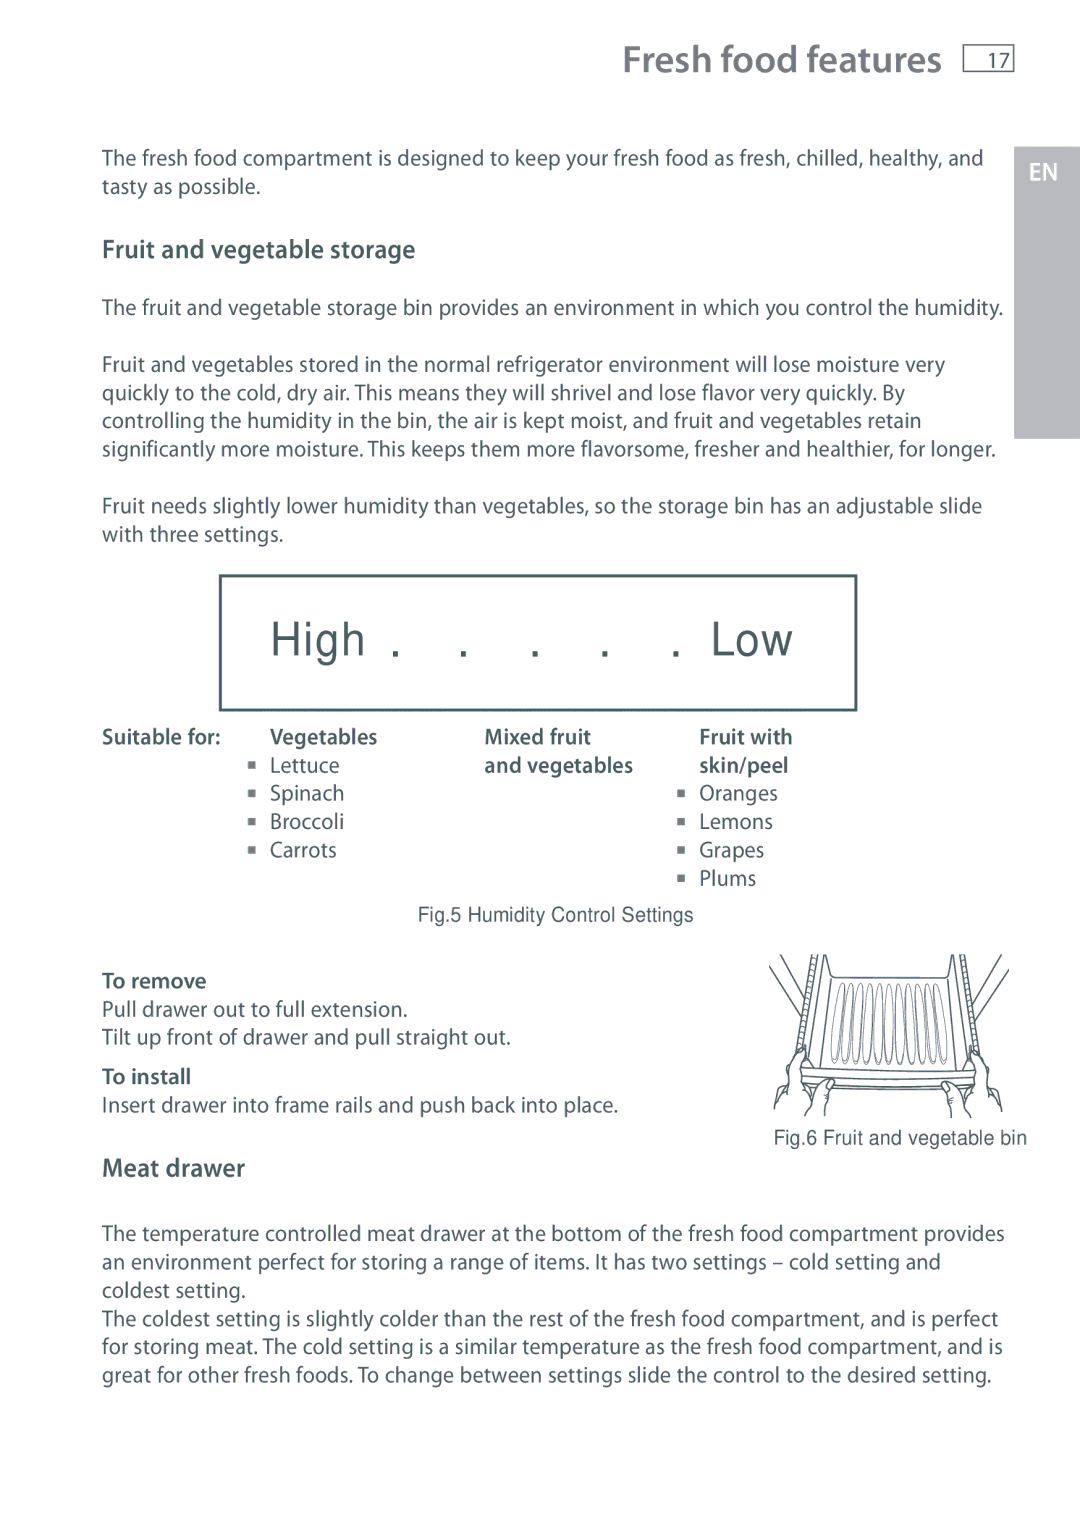 Fisher & Paykel RX256, RX216 installation instructions Fresh food features, Fruit and vegetable storage, Meat drawer 